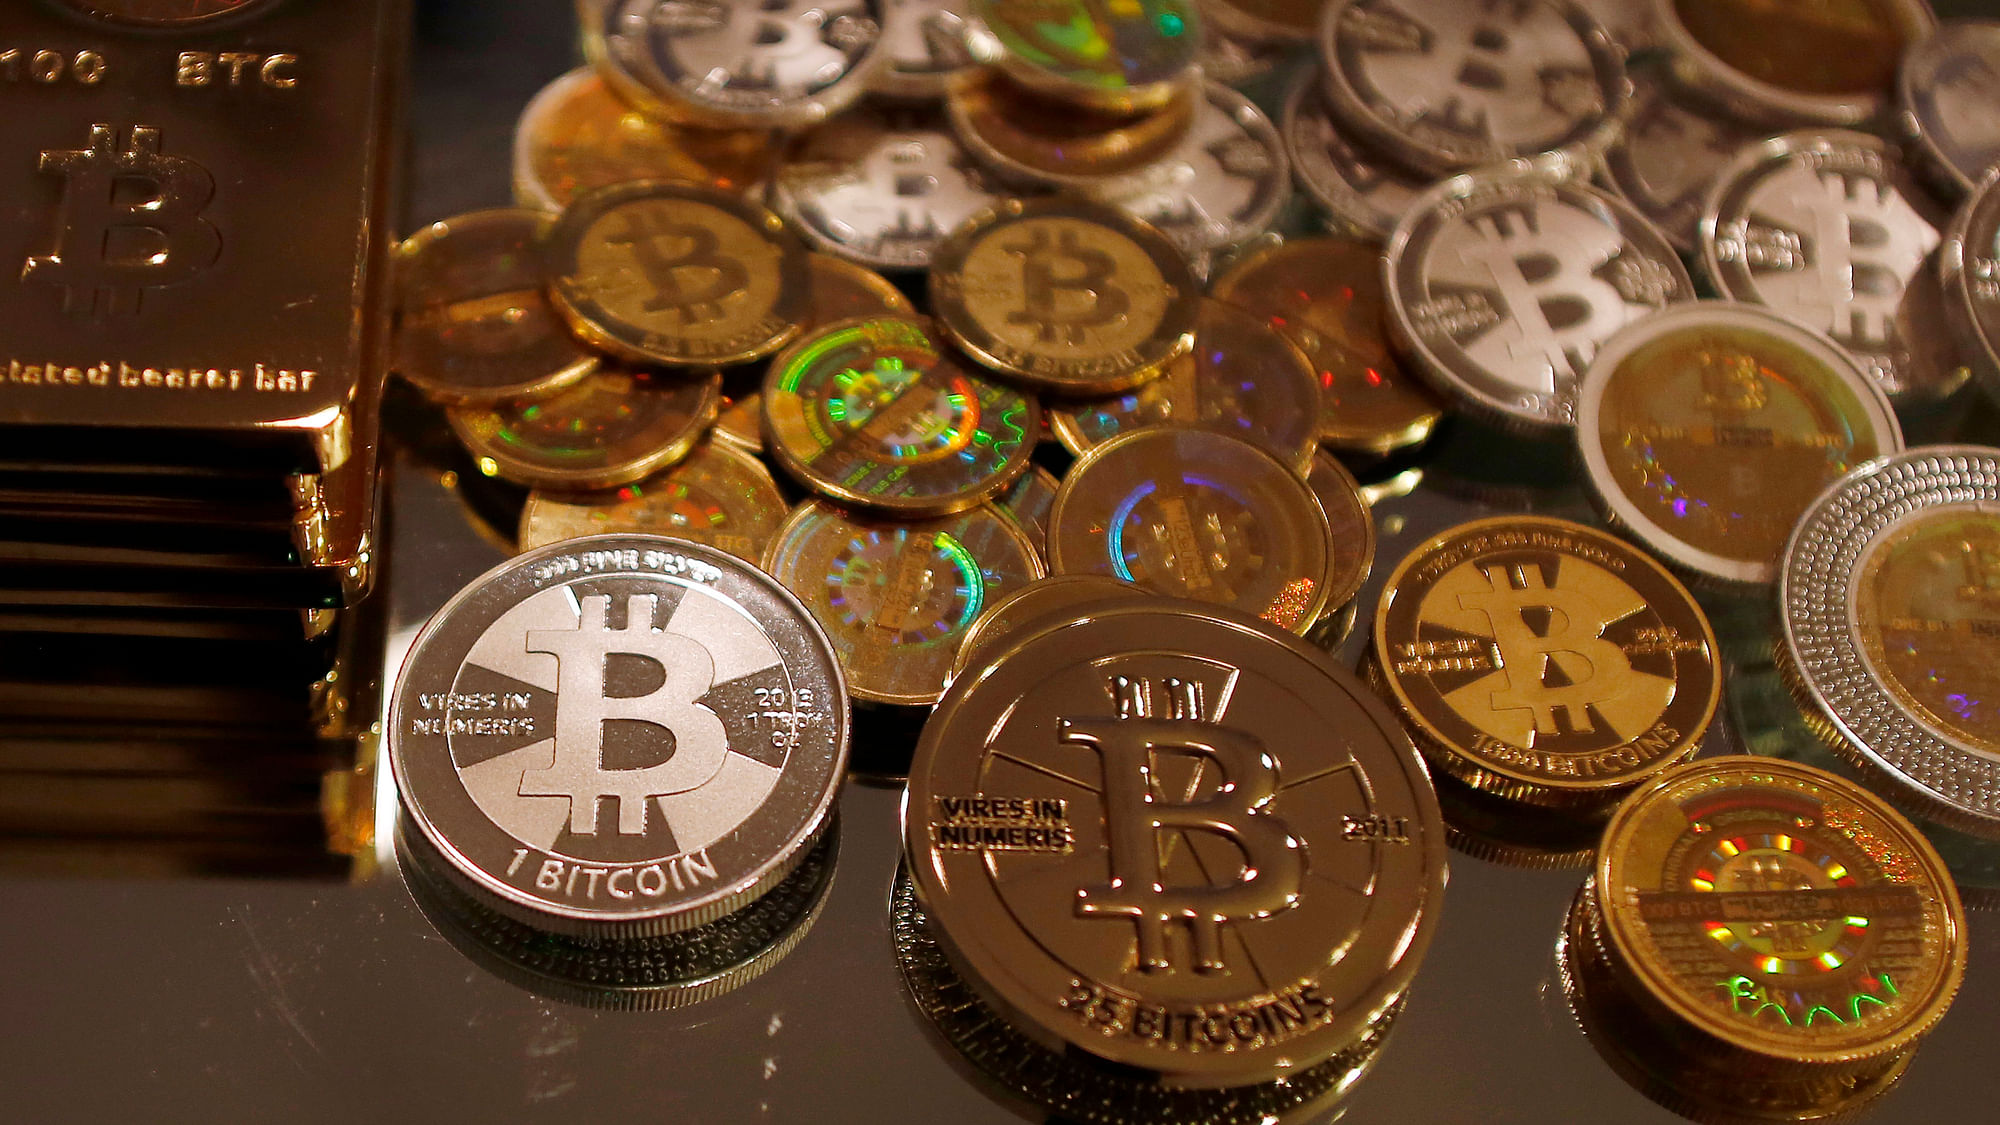 The RBI issued another caution about the risks of trading in Bitcoin